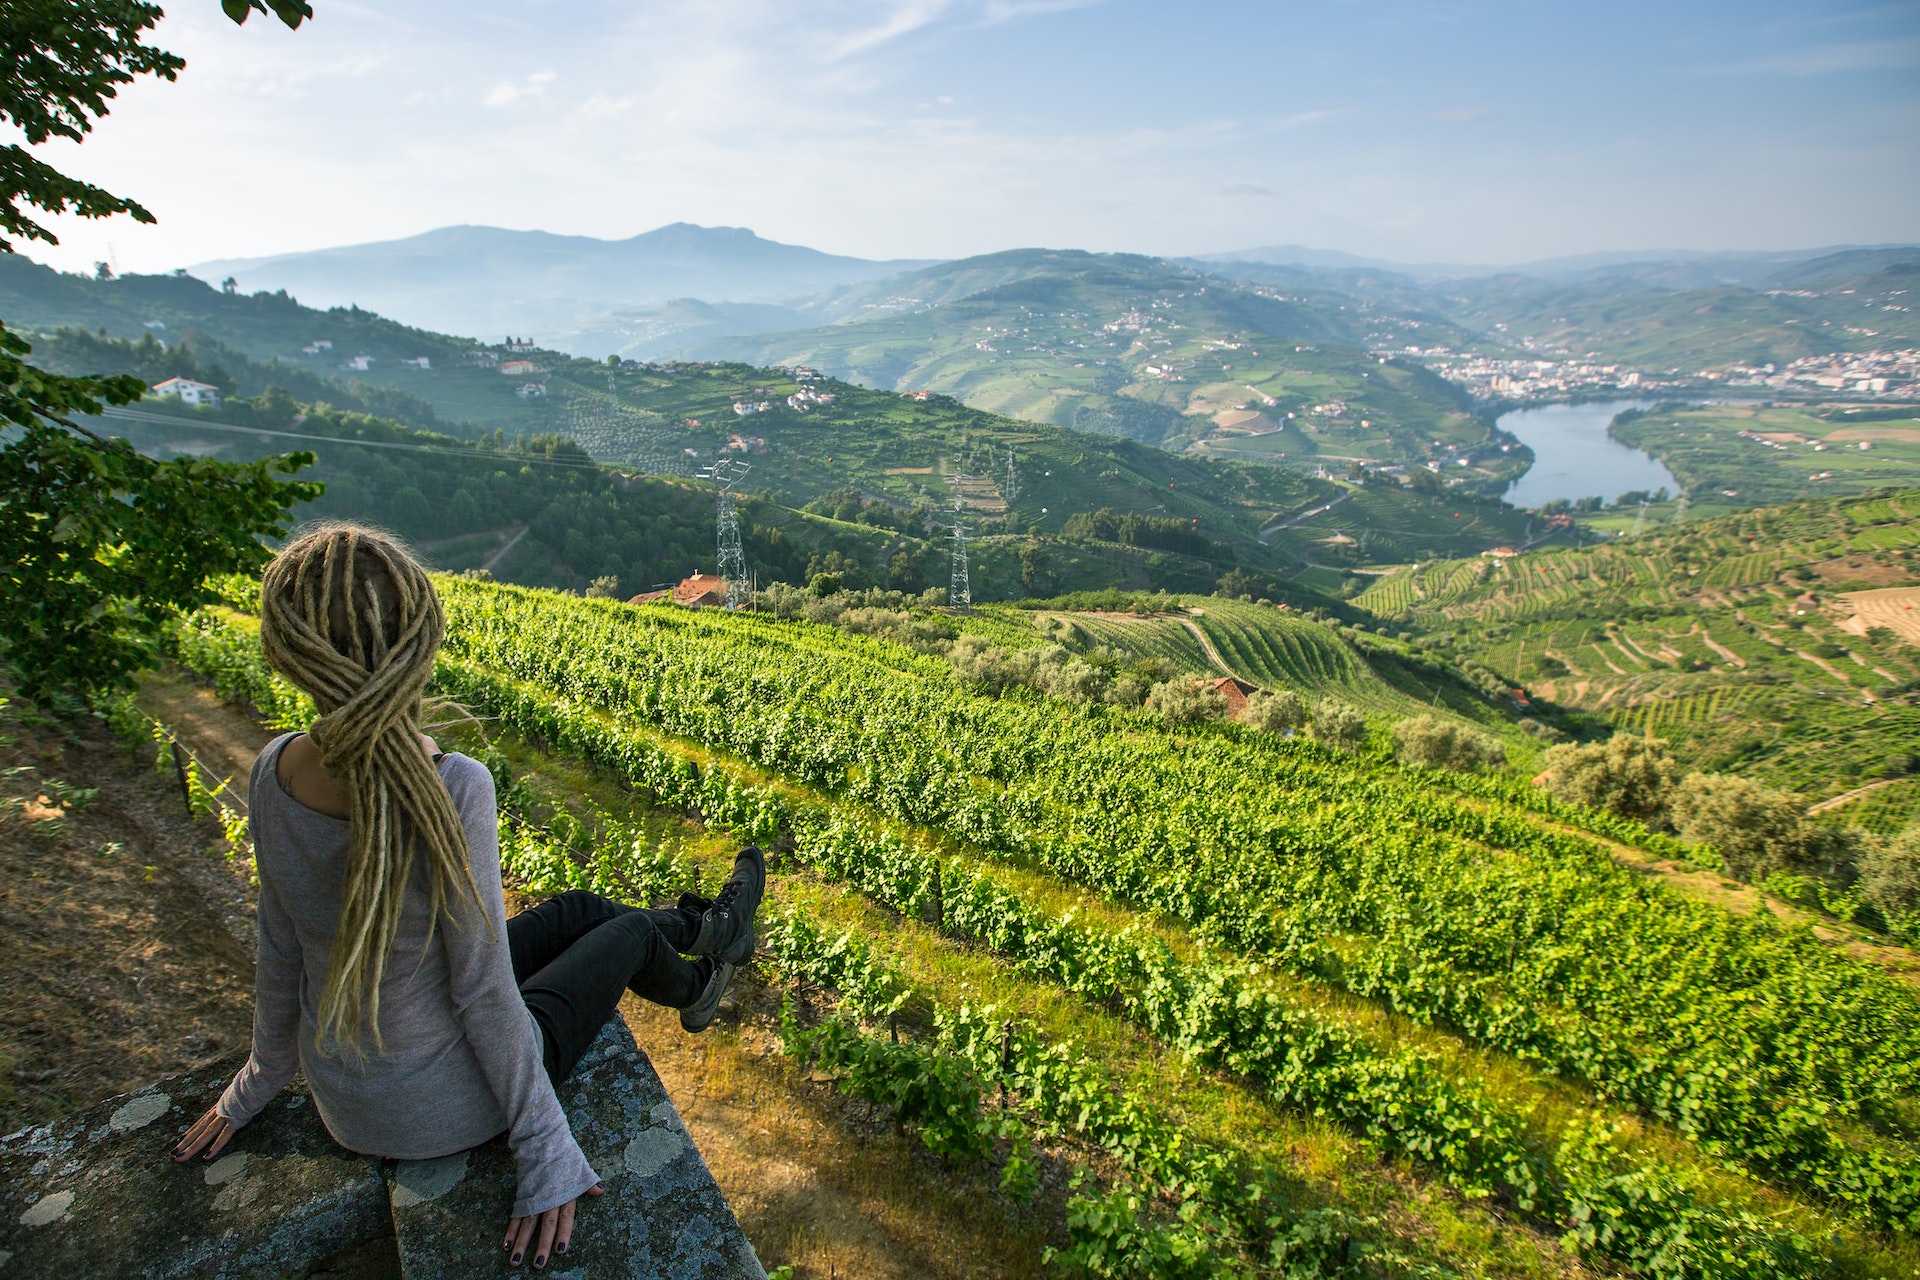 A woman sits on the edge of a vineyard looking out over rolling hills of vines